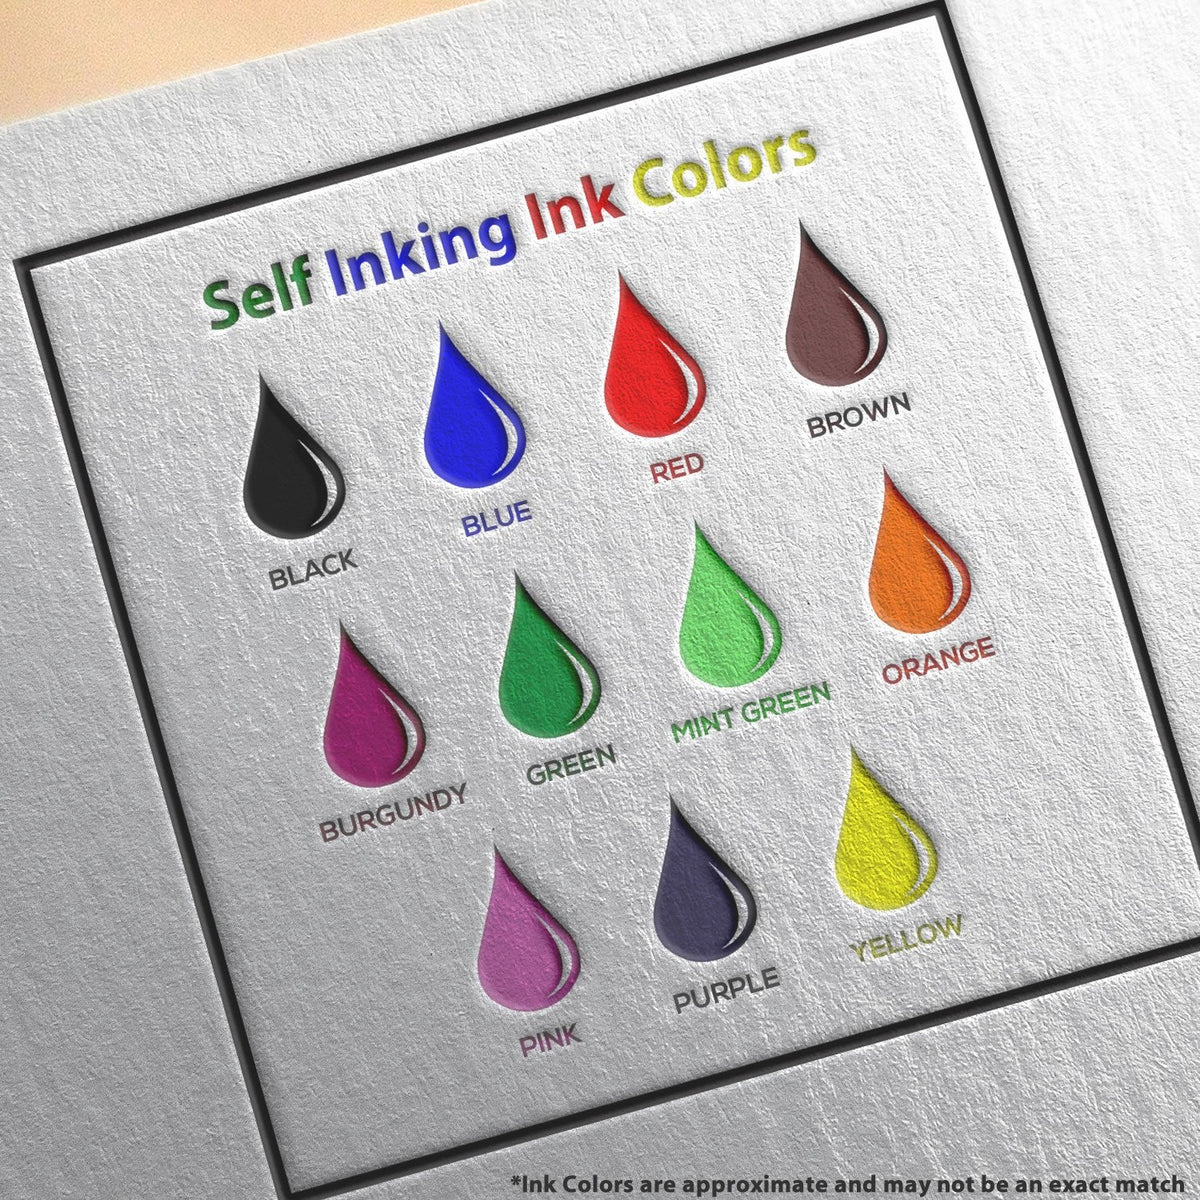 Self-Inking Restricted Area Stamp Ink Color Options